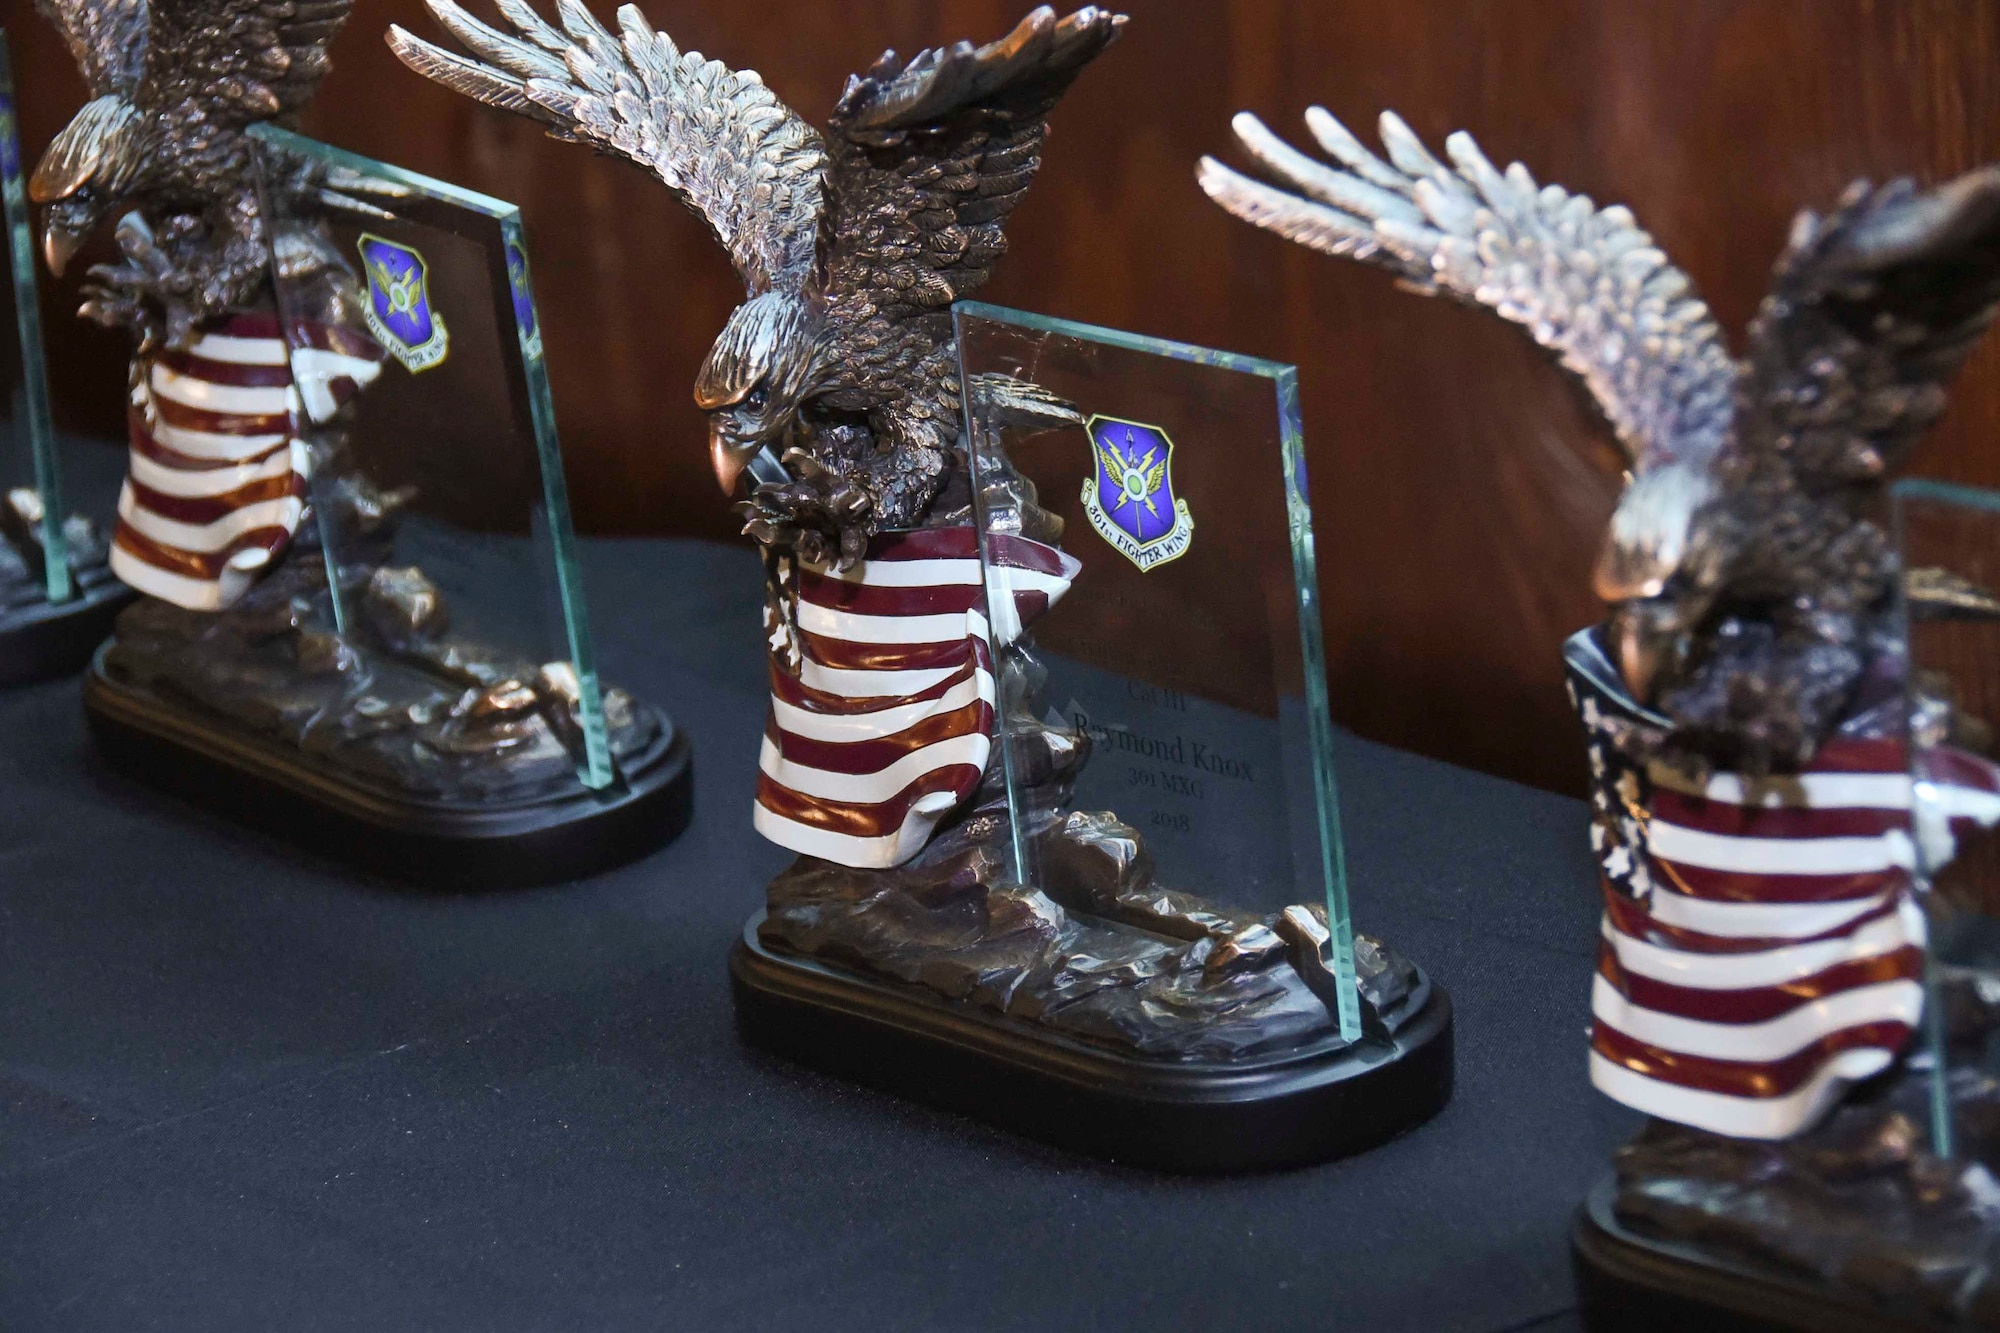 The 301st Fighter Wing holds an annual awards banquet Feb. 9, 2019 at River Ranch Stockyards, Fort Worth, Texas. The banquet recognized outstanding Airmen, first sergeants, officers, civilians, and the Henry D. Green award recipient for community service.
(U.S. Air Force photo by MSgt. Jeremy Roman)